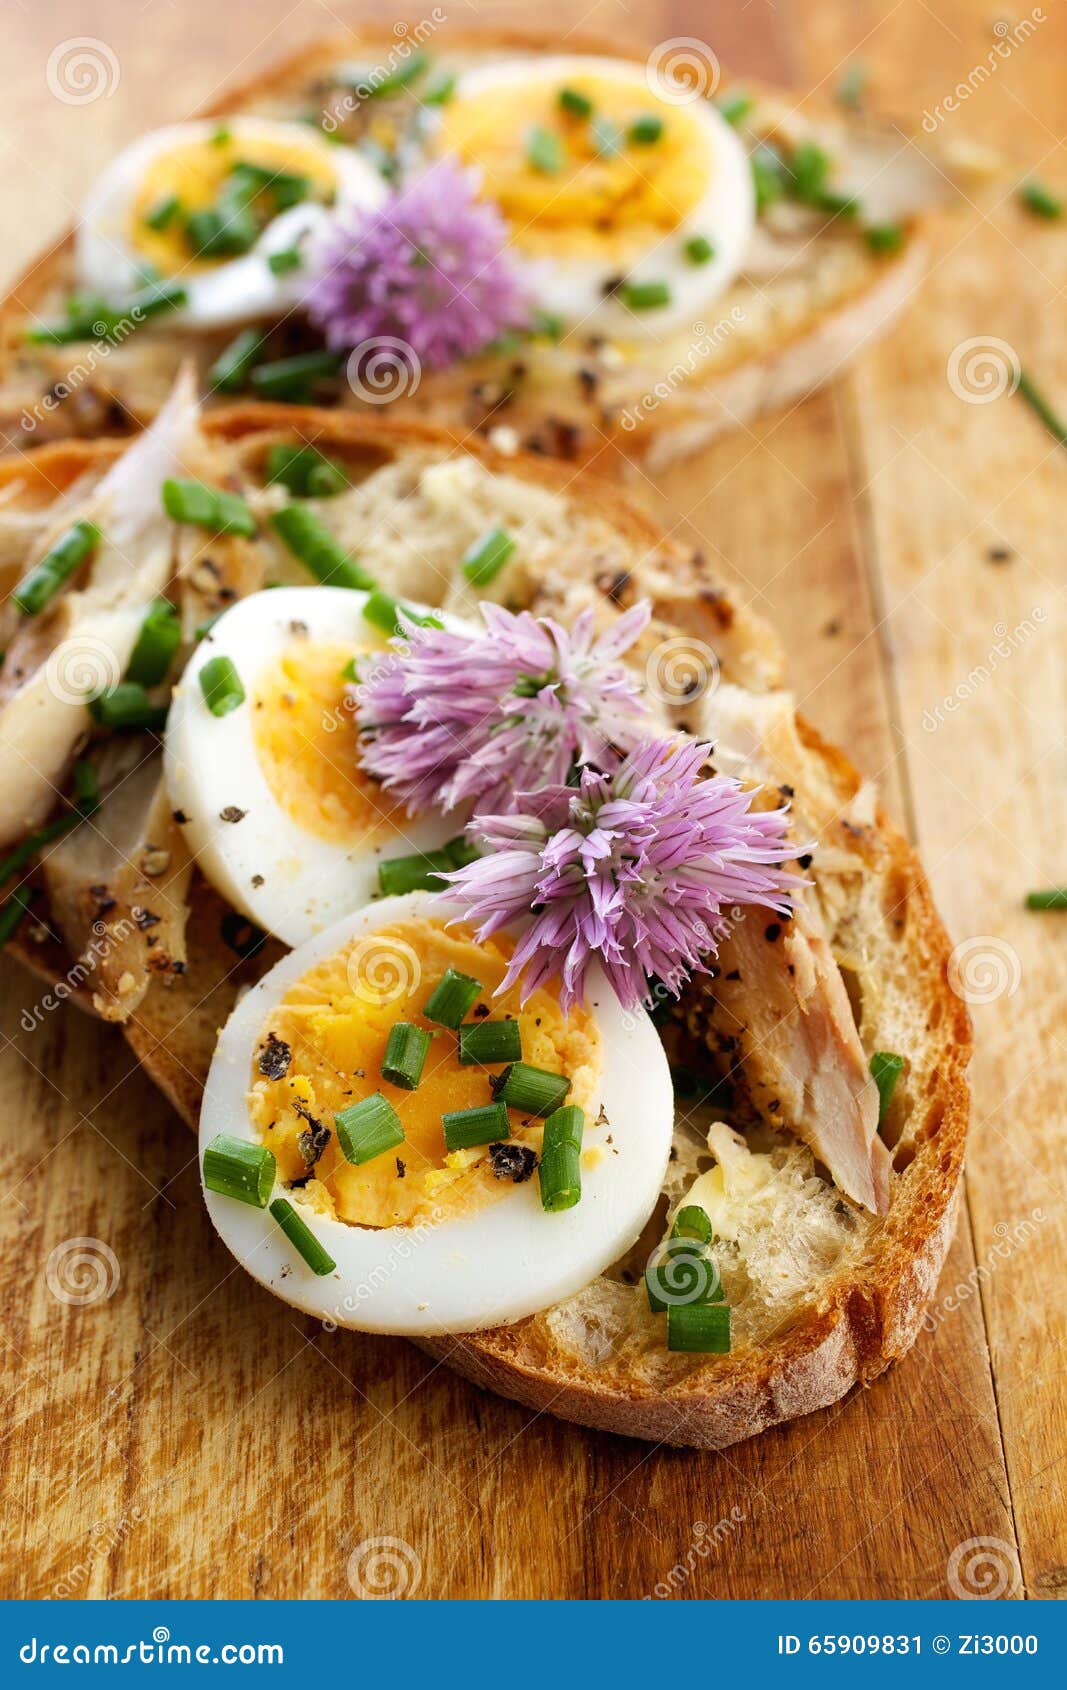 sandwich with adition of mackerel fish , eggs and edible flowers of chives on wooden table